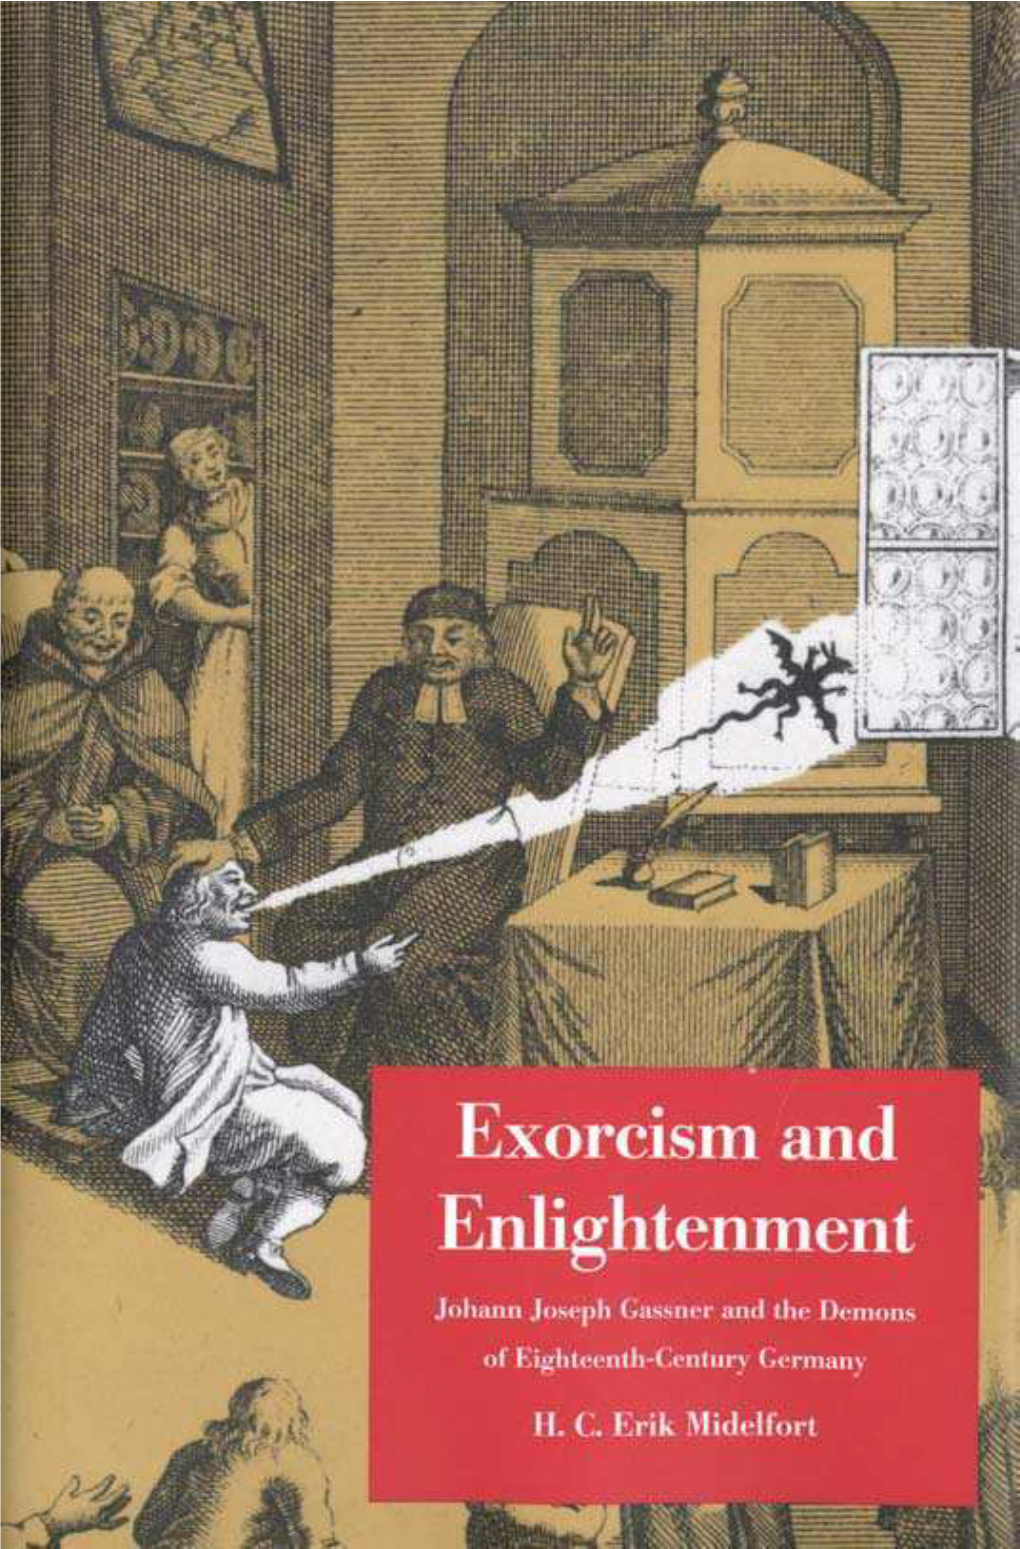 Exorcism and Enlightenment Johann Joseph Gassner and the Demons of Eighteenth-Century Germany